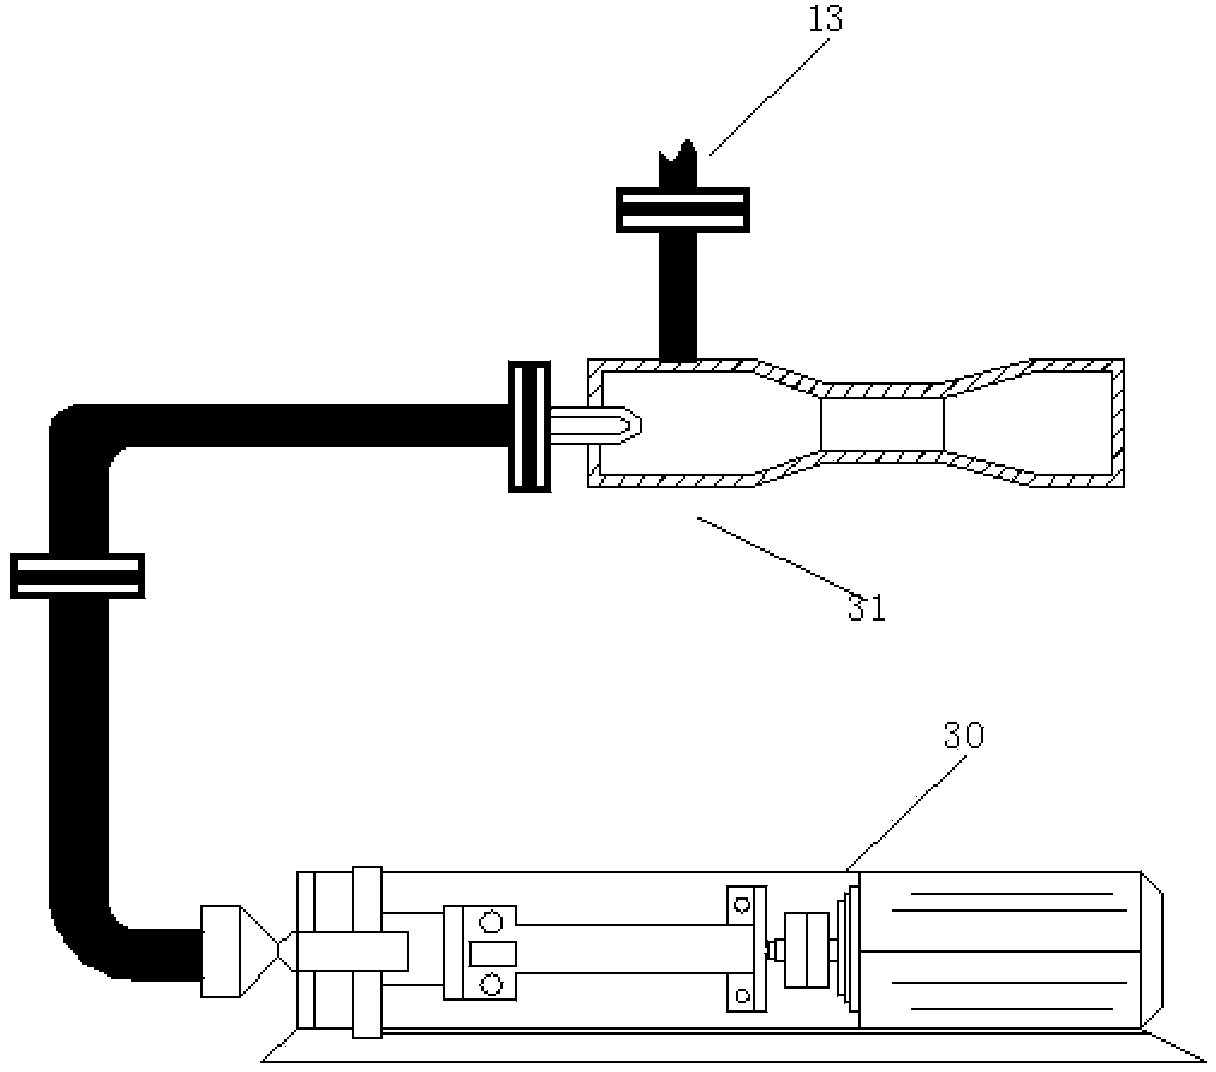 Rapid thermal excitation exploitation device for natural gas hydrate